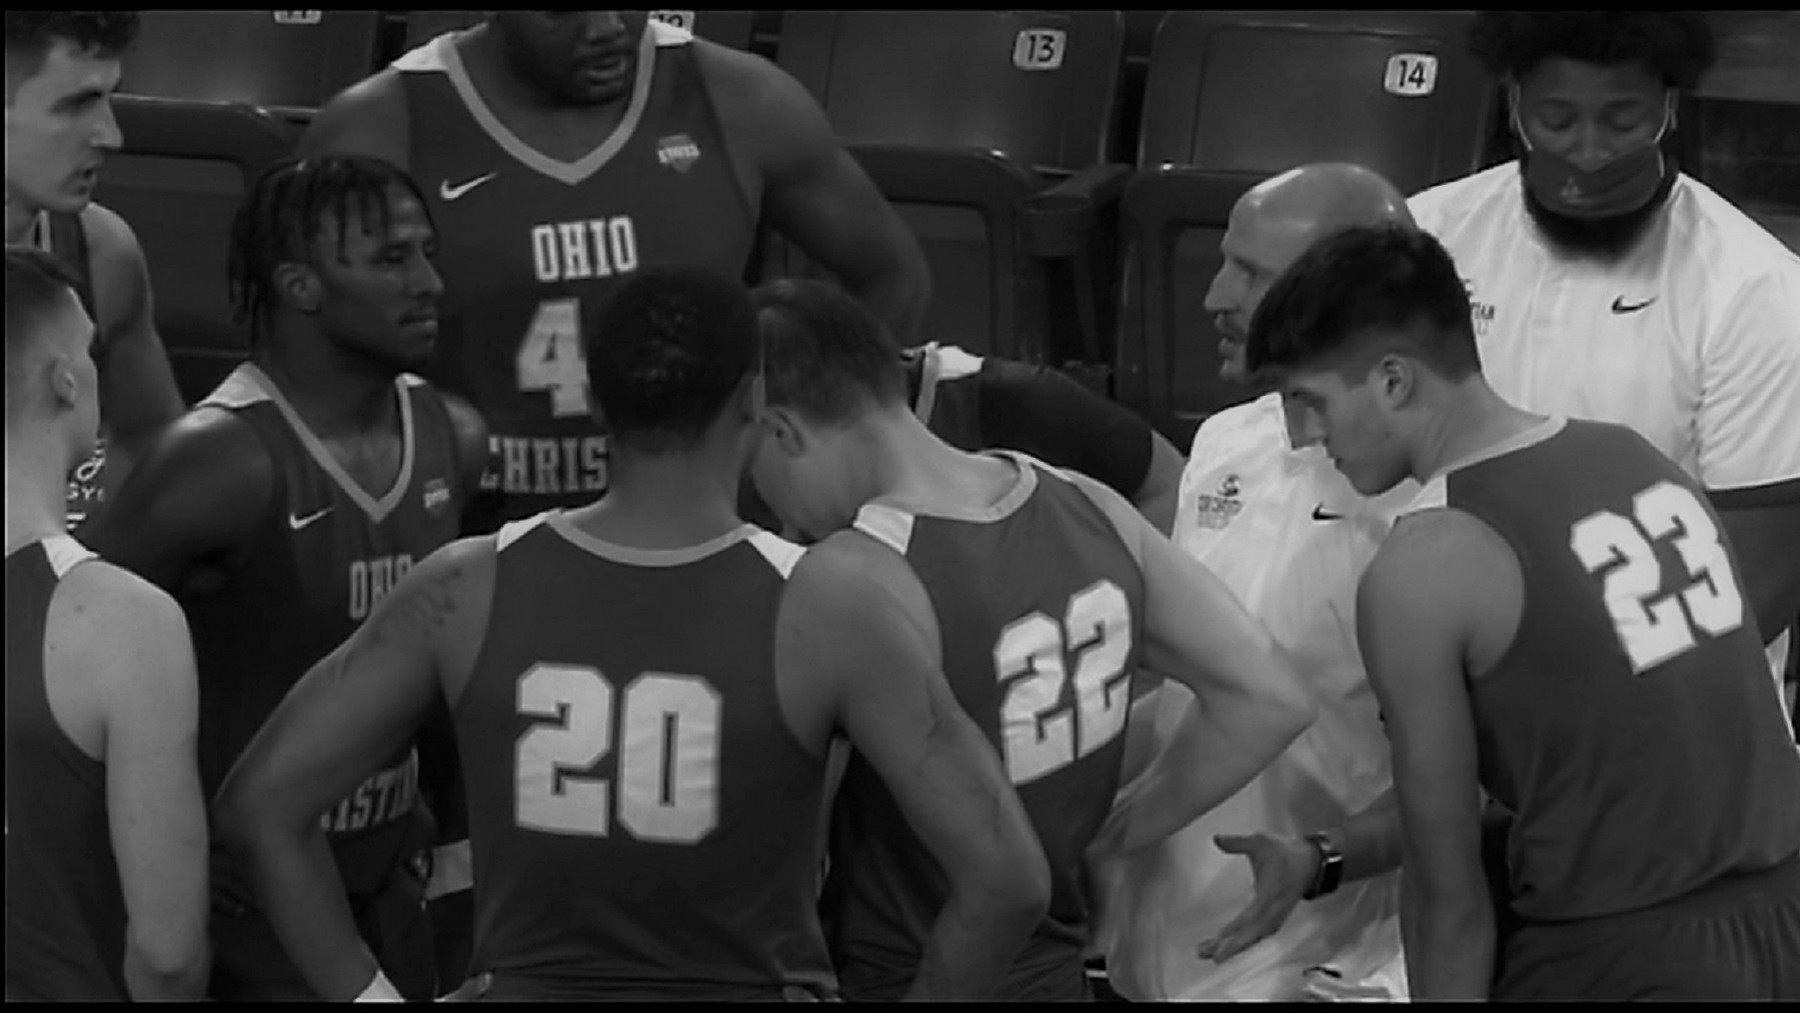 OHIO CHRISTIAN FACES OFF AGAINST OAKLAND UNIVERSITY IN EXHIBITION